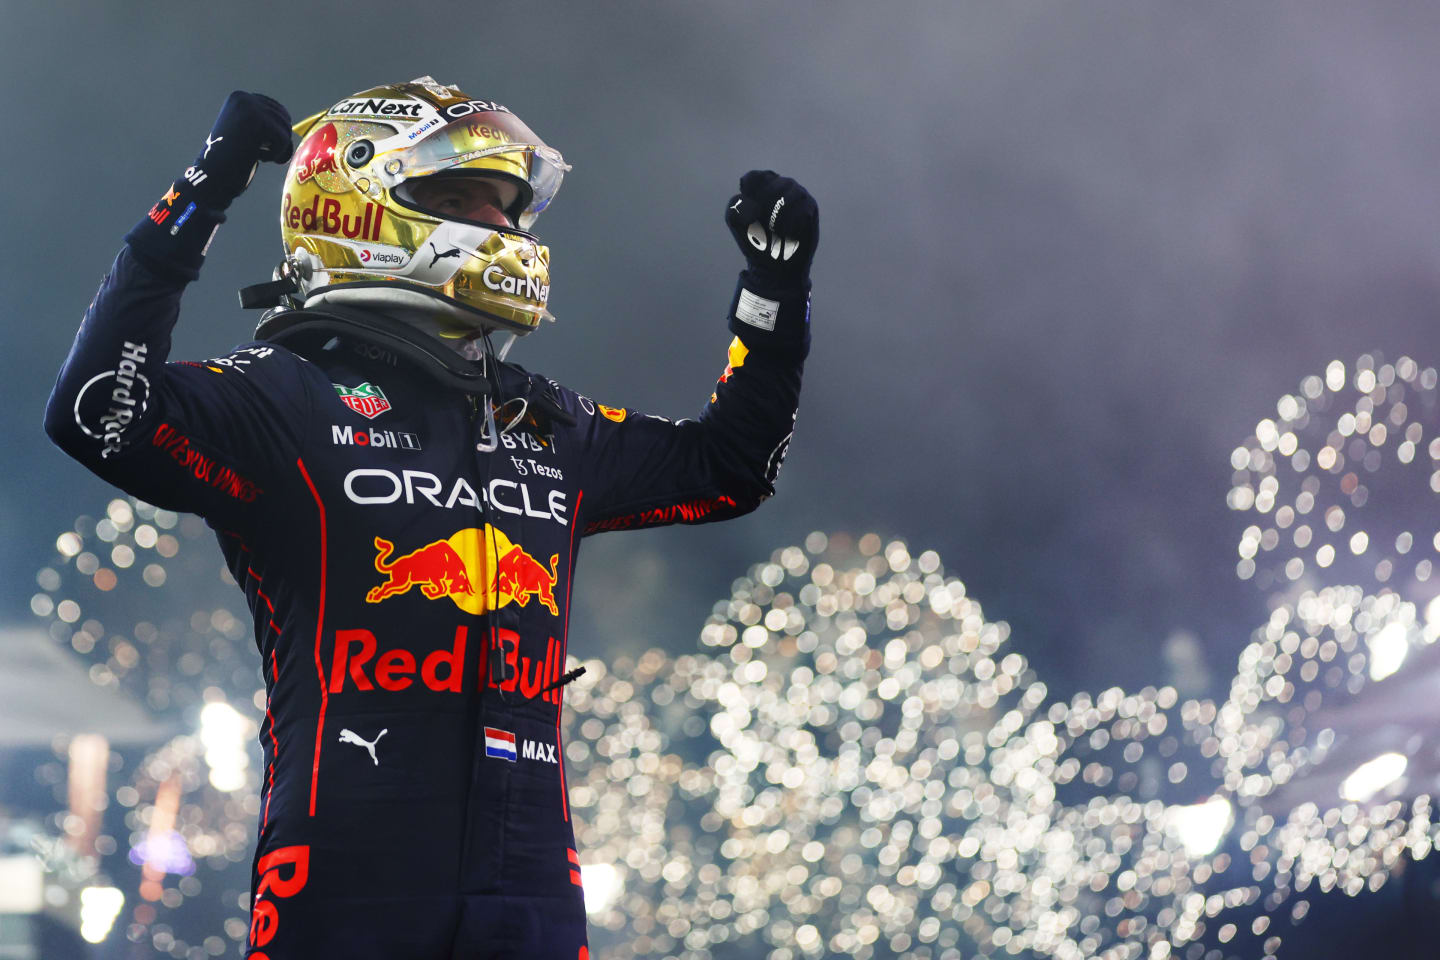 ABU DHABI, UNITED ARAB EMIRATES - NOVEMBER 20: Race winner Max Verstappen of the Netherlands and Oracle Red Bull Racing celebrates in parc ferme during the F1 Grand Prix of Abu Dhabi at Yas Marina Circuit on November 20, 2022 in Abu Dhabi, United Arab Emirates. (Photo by Dan Istitene - Formula 1/Formula 1 via Getty Images)